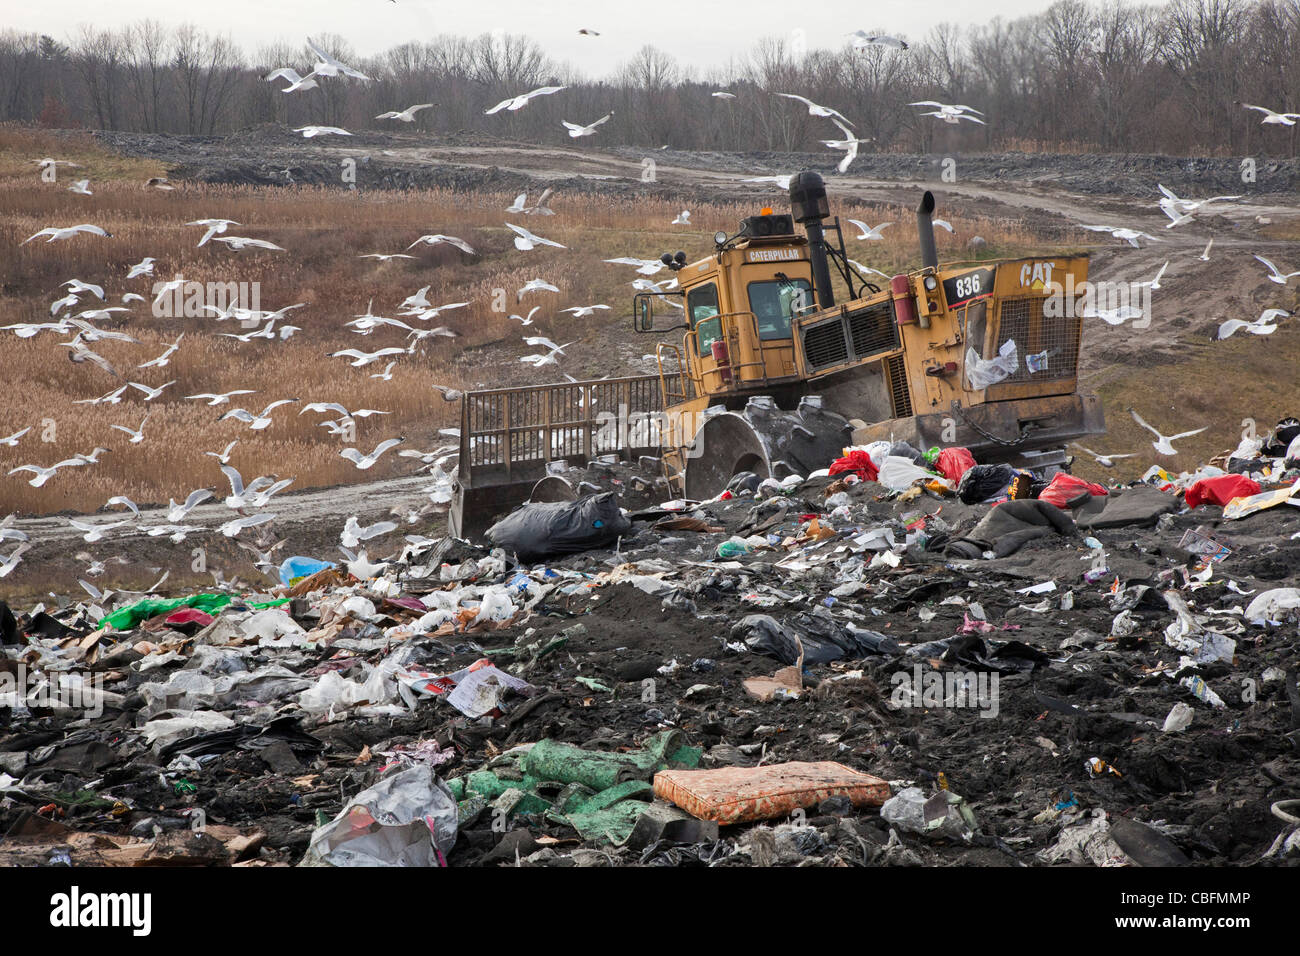 Smith's Creek, Michigan - A bulldozer levels and compacts garbage at St. Clair County's Smith's Creek Landfill. Stock Photo